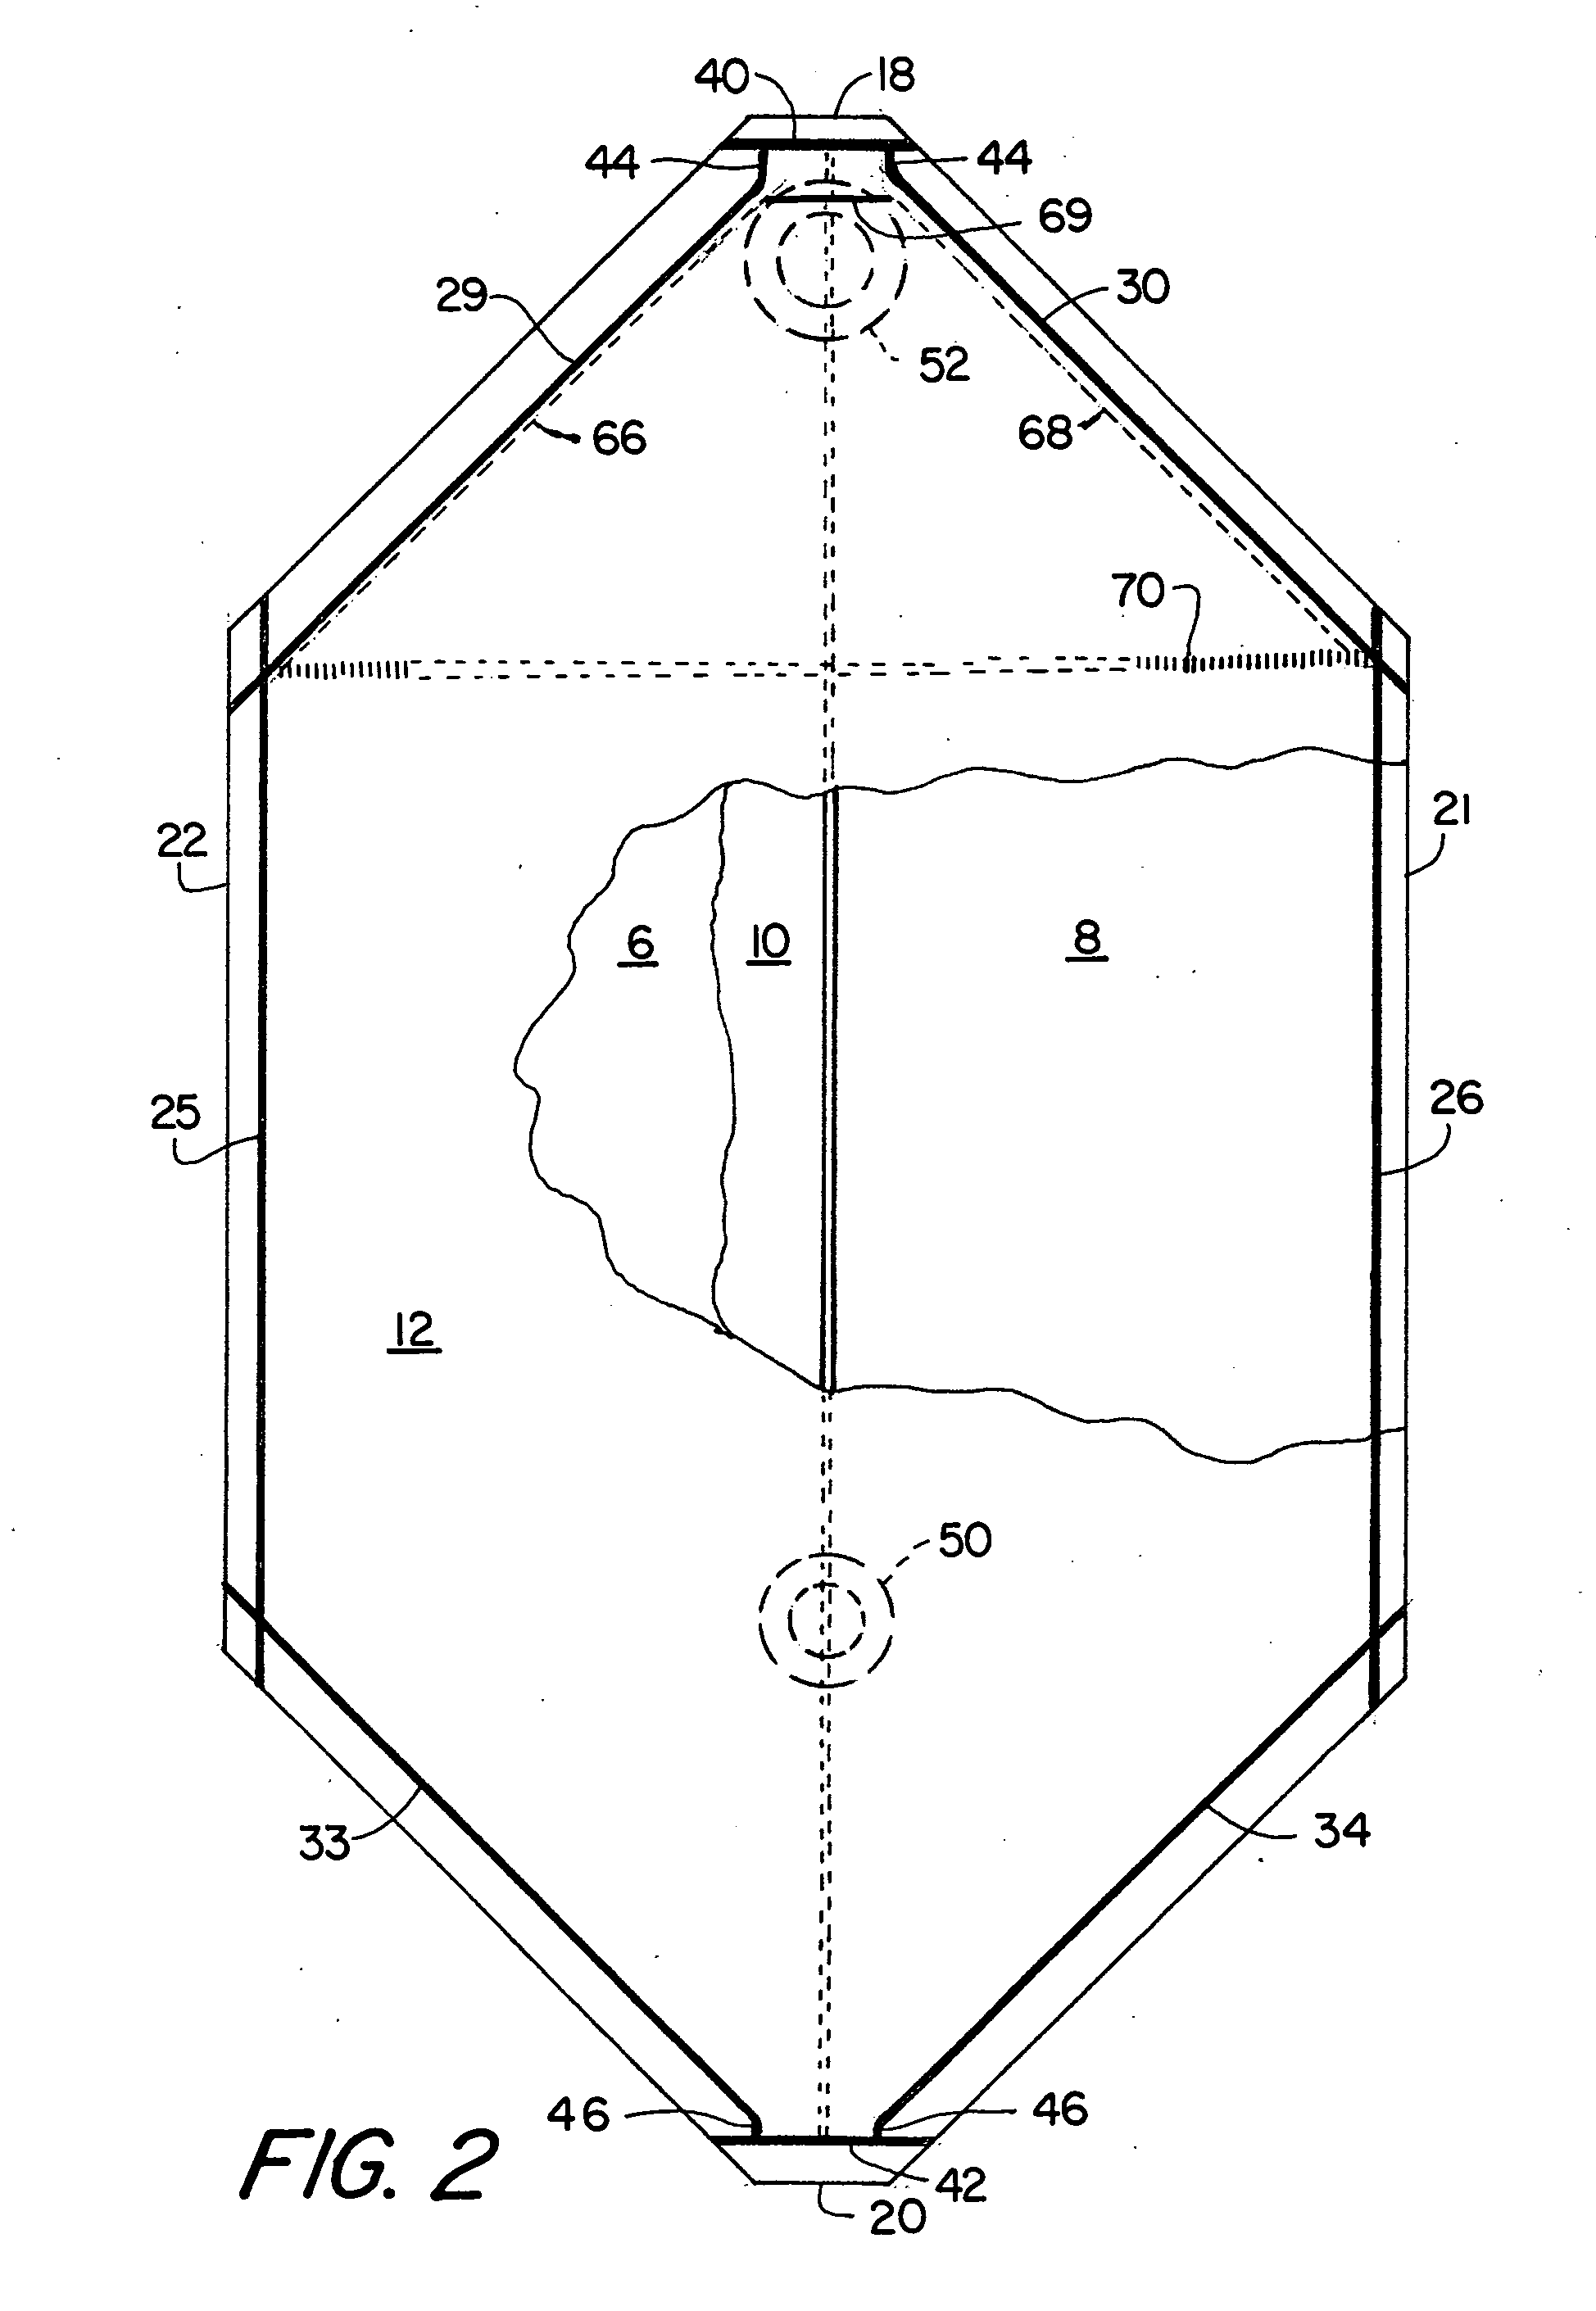 Bag with flap for bag-in-box container system